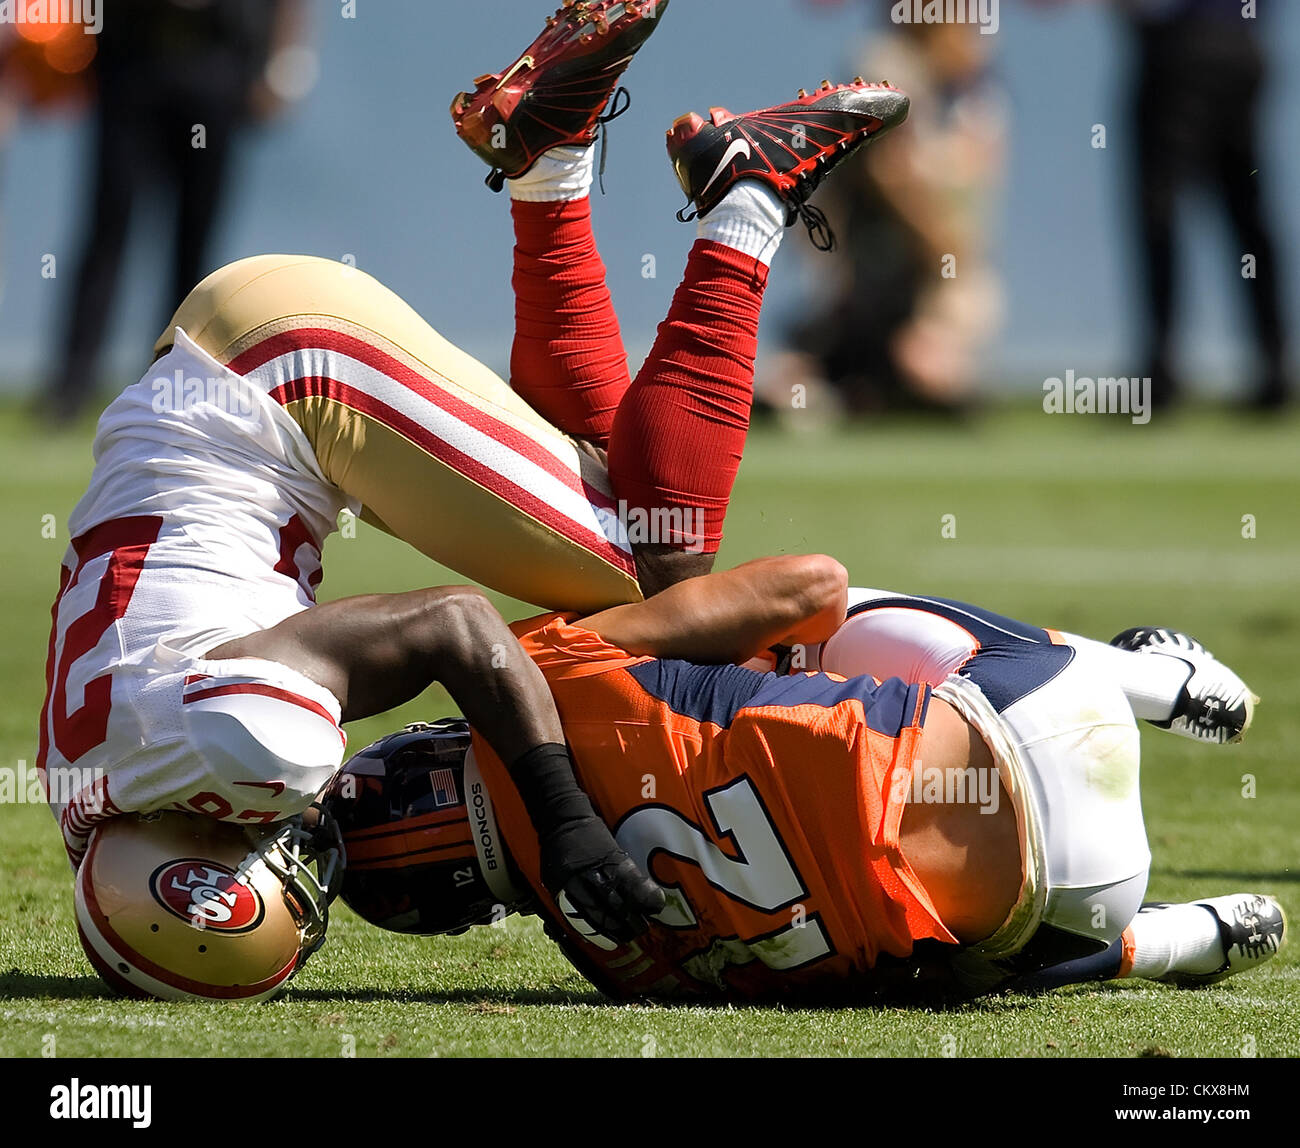 Aug. 26, 2012 - Denver, CO, USA - Broncos WR MATTHEW WILLIS, right, gets up ended by 49ers CB TRAMAINE BROCK, left, during the 1st. half at Sports Authority Field at Mile High Sunday afternoon. The Broncos lose to the the 49ers 29-24. (Credit Image: © Hector Acevedo/ZUMAPRESS.com) Stock Photo